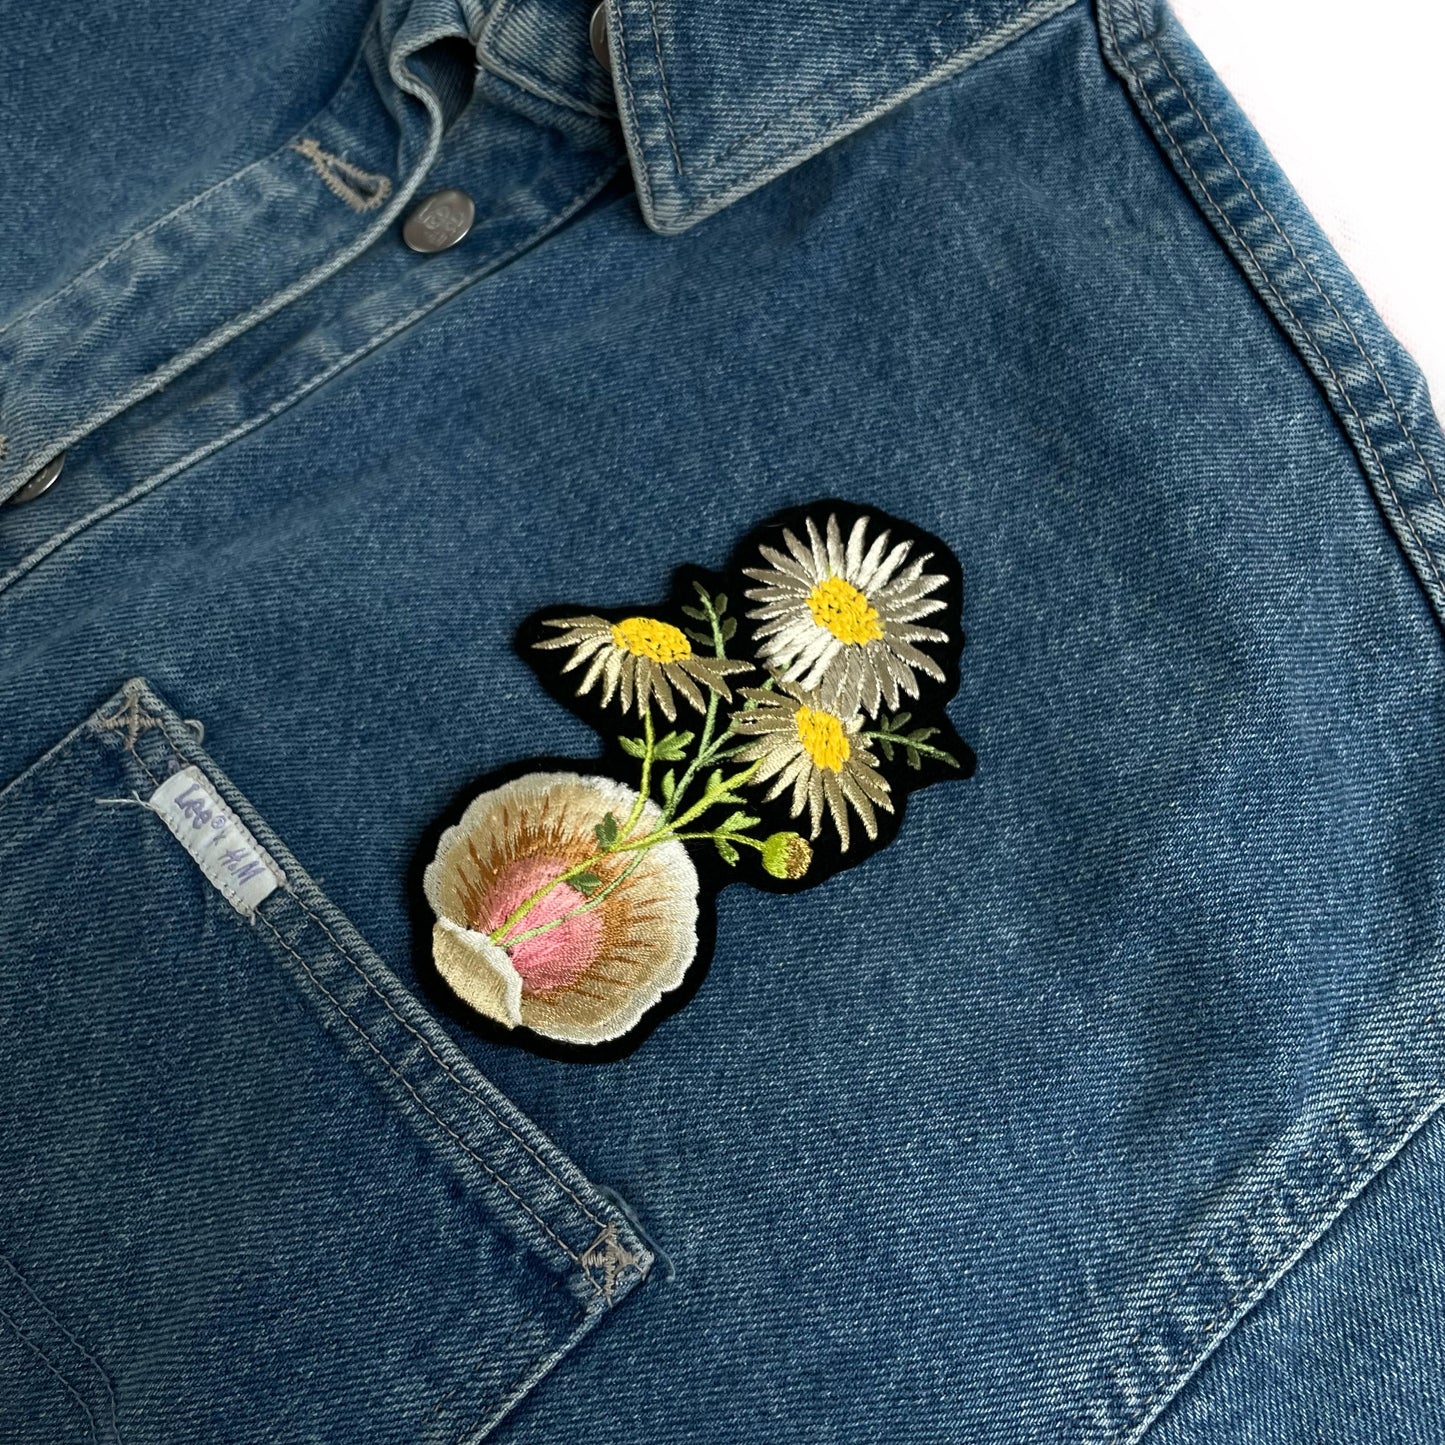 Metallic Daisy & Shell Embroidered Patch shown above pocket on a denim jacket